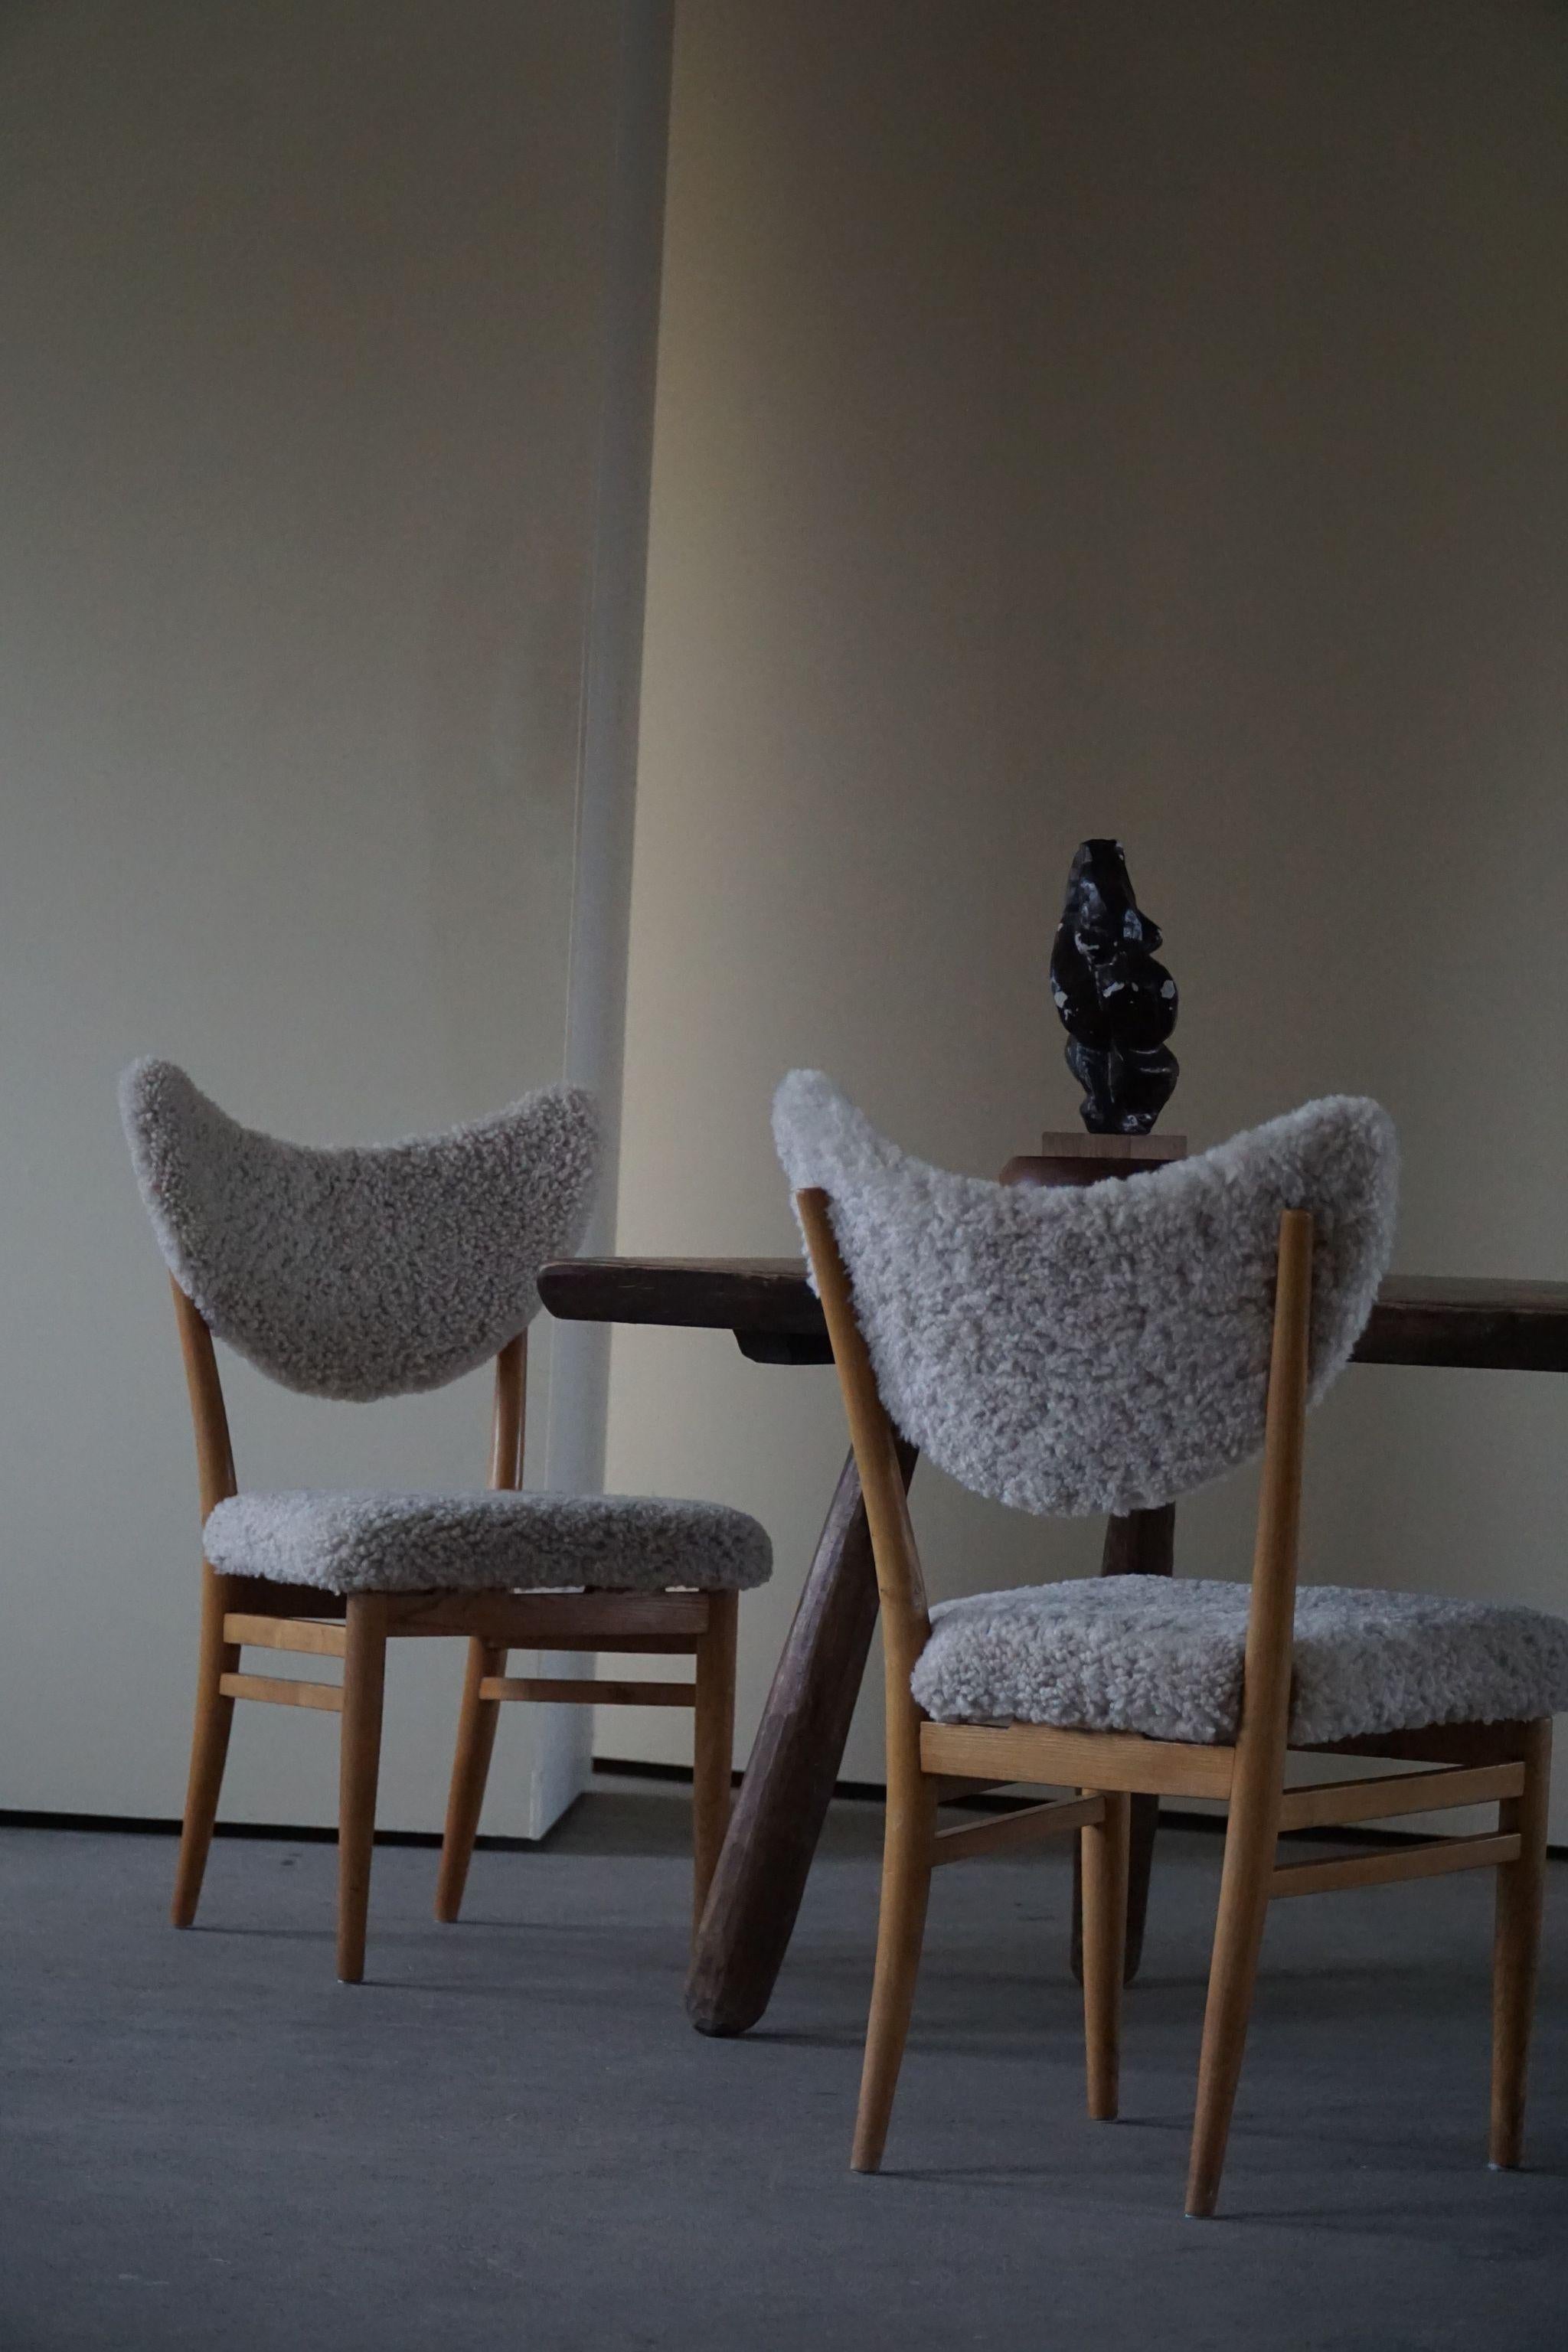 Hvidt & Mølgaard, Set of 4 Chairs in Ash, Reupholstered in Lambswool, 1950s For Sale 2